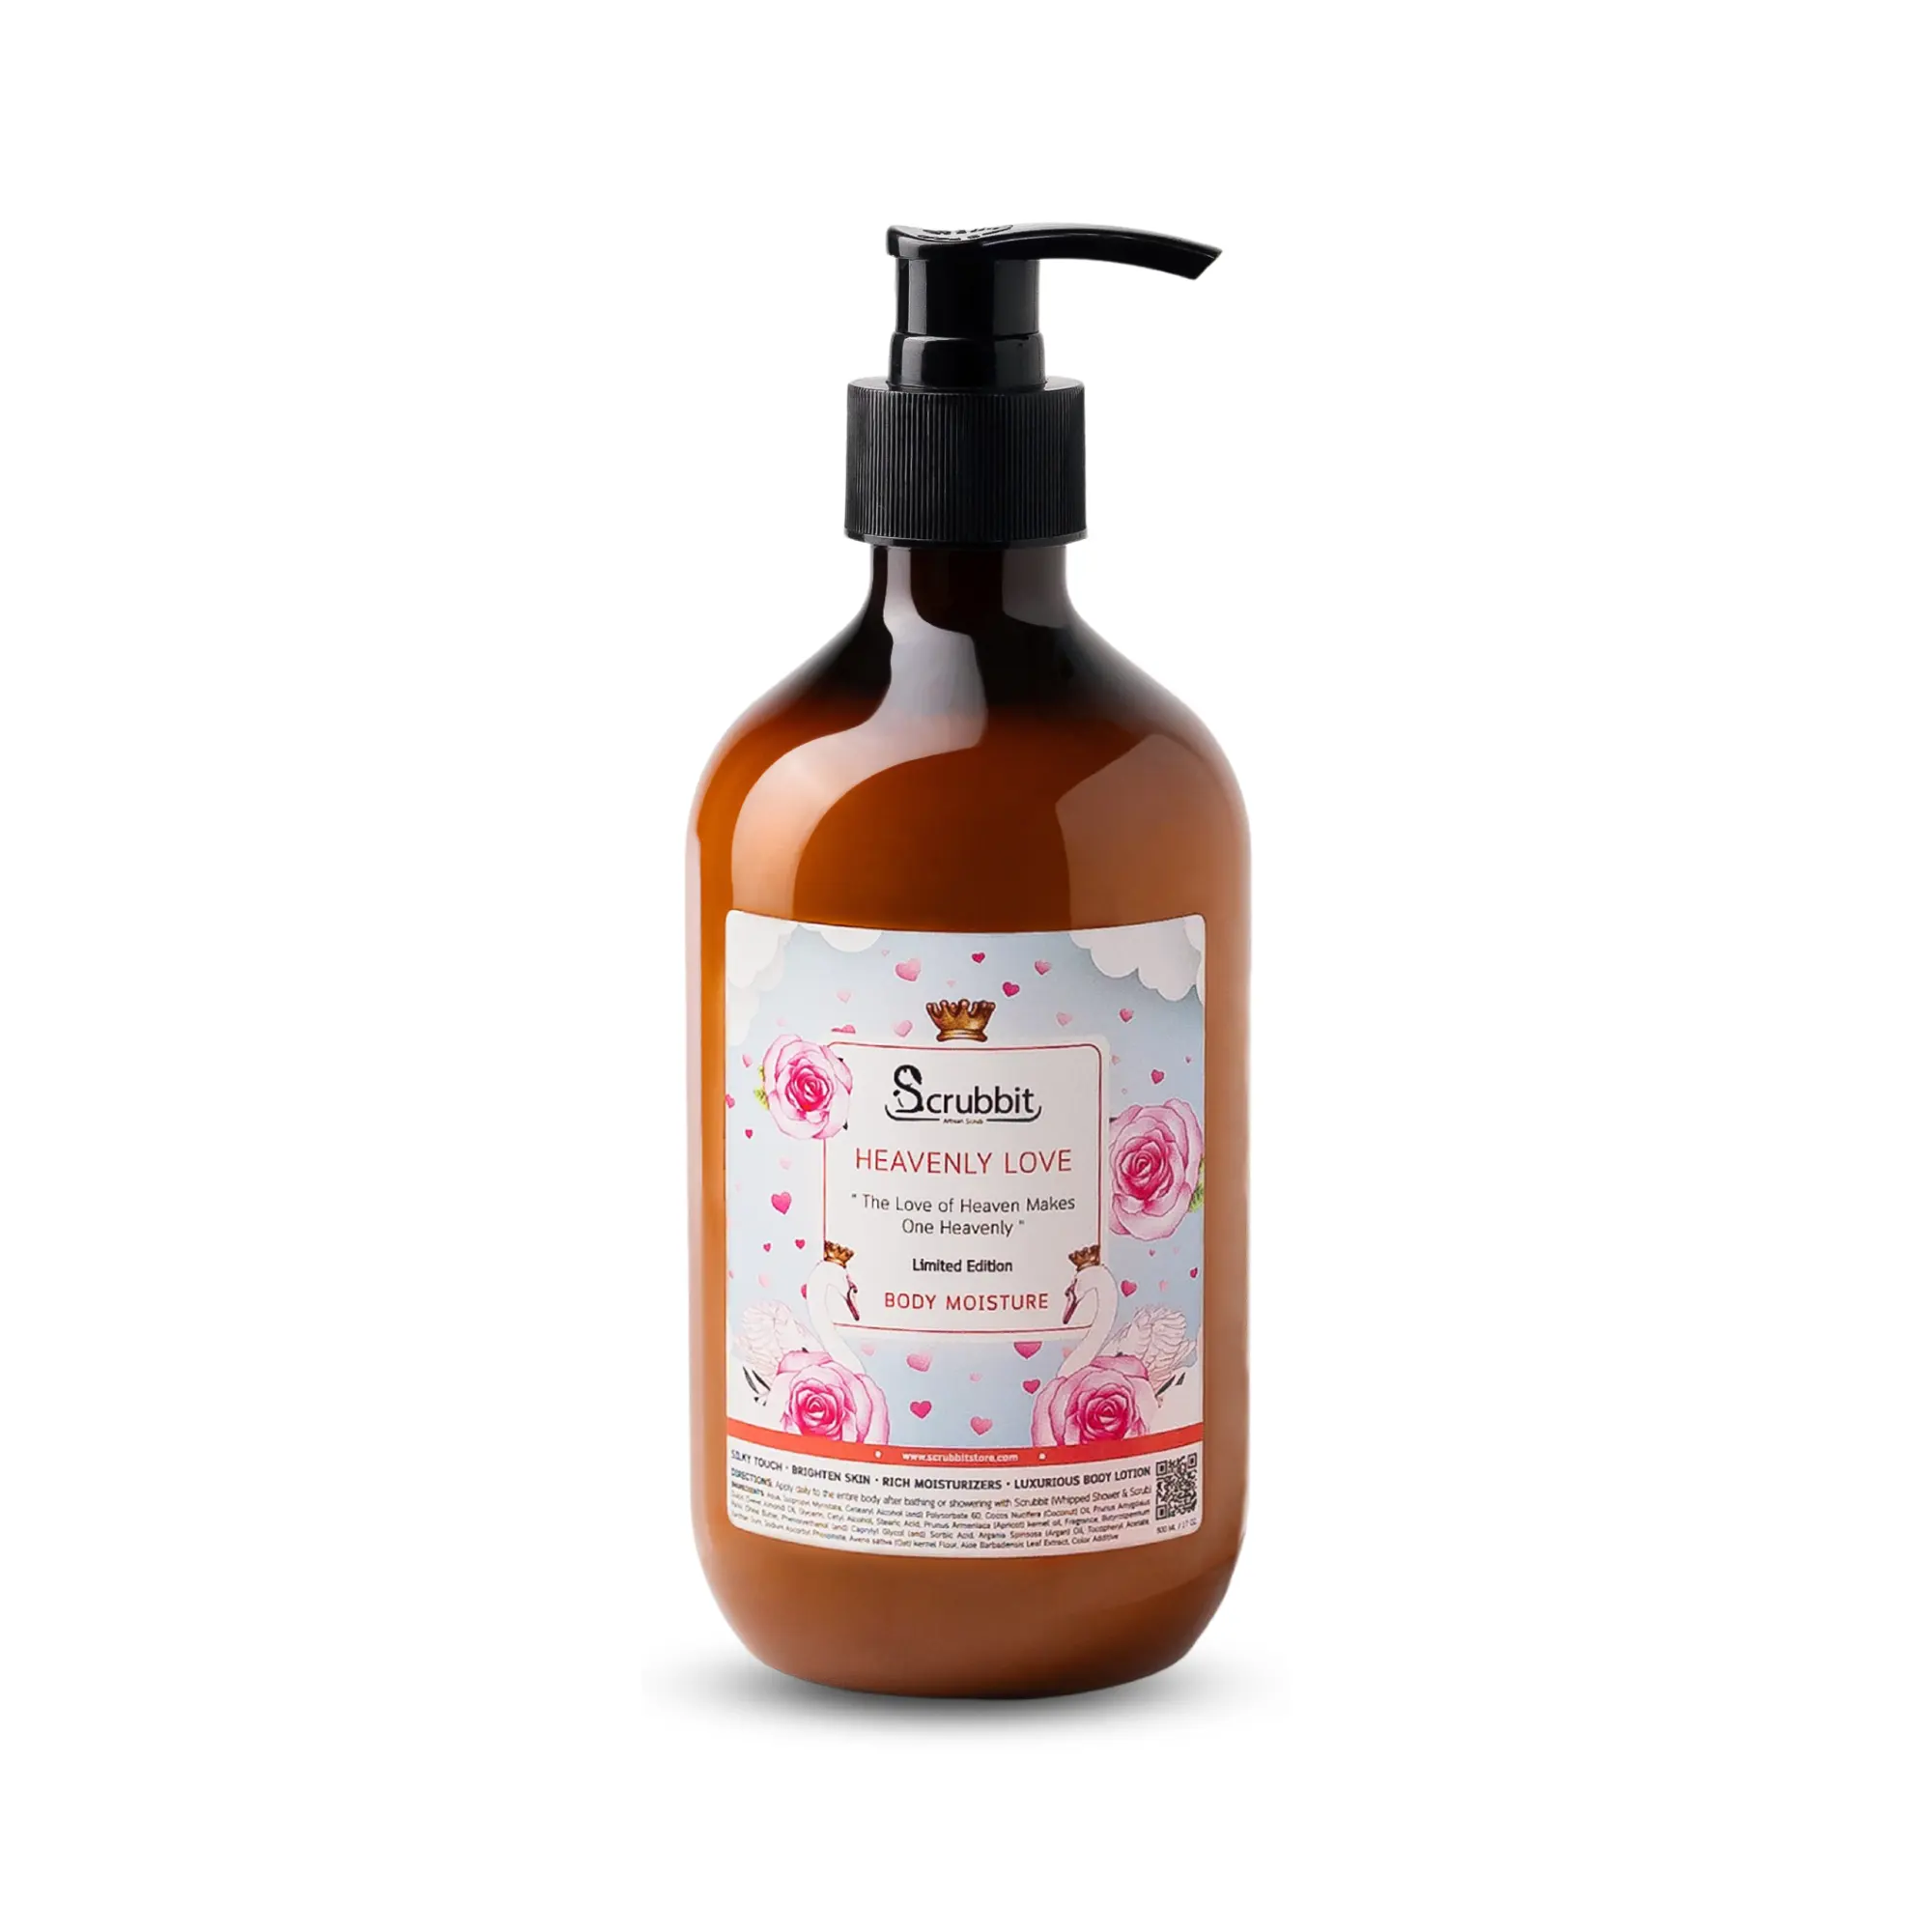 Body Lotion Heavenly Love Body Lotion Premium Skin Care 17 oz Best Seller Product From Thailand Luxury For Your Skin